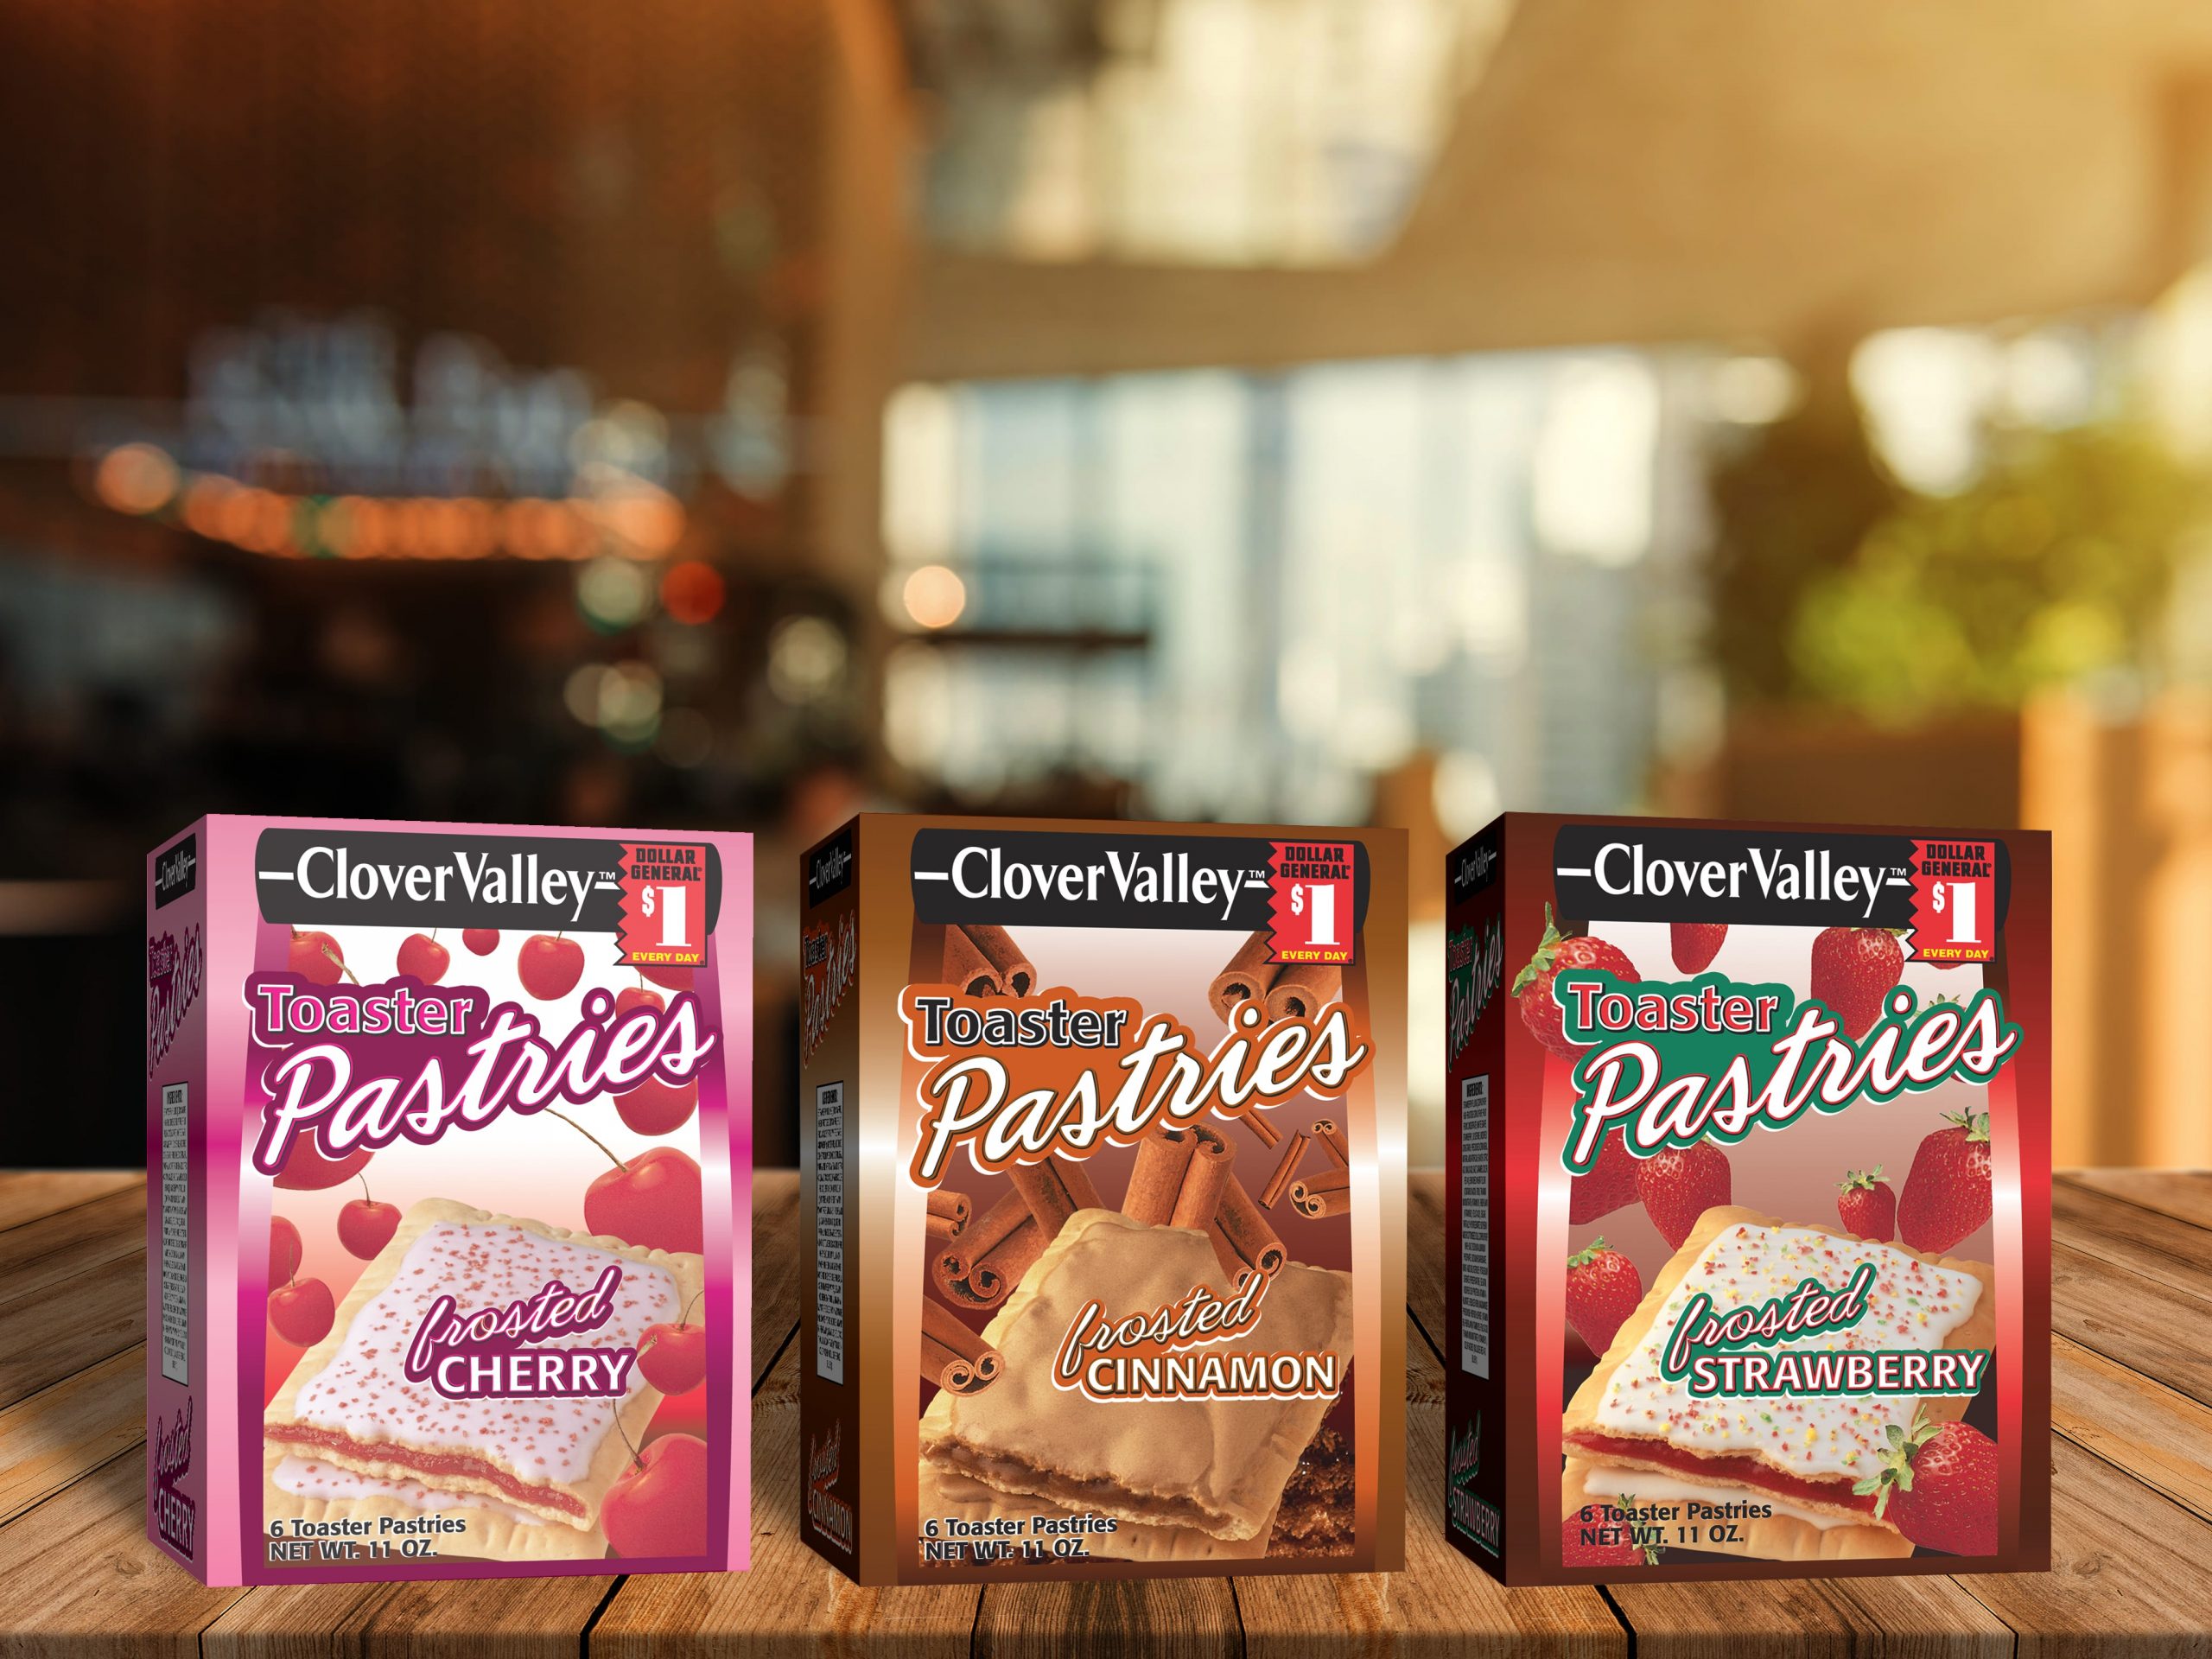 Clover Valley Toaster Pastries